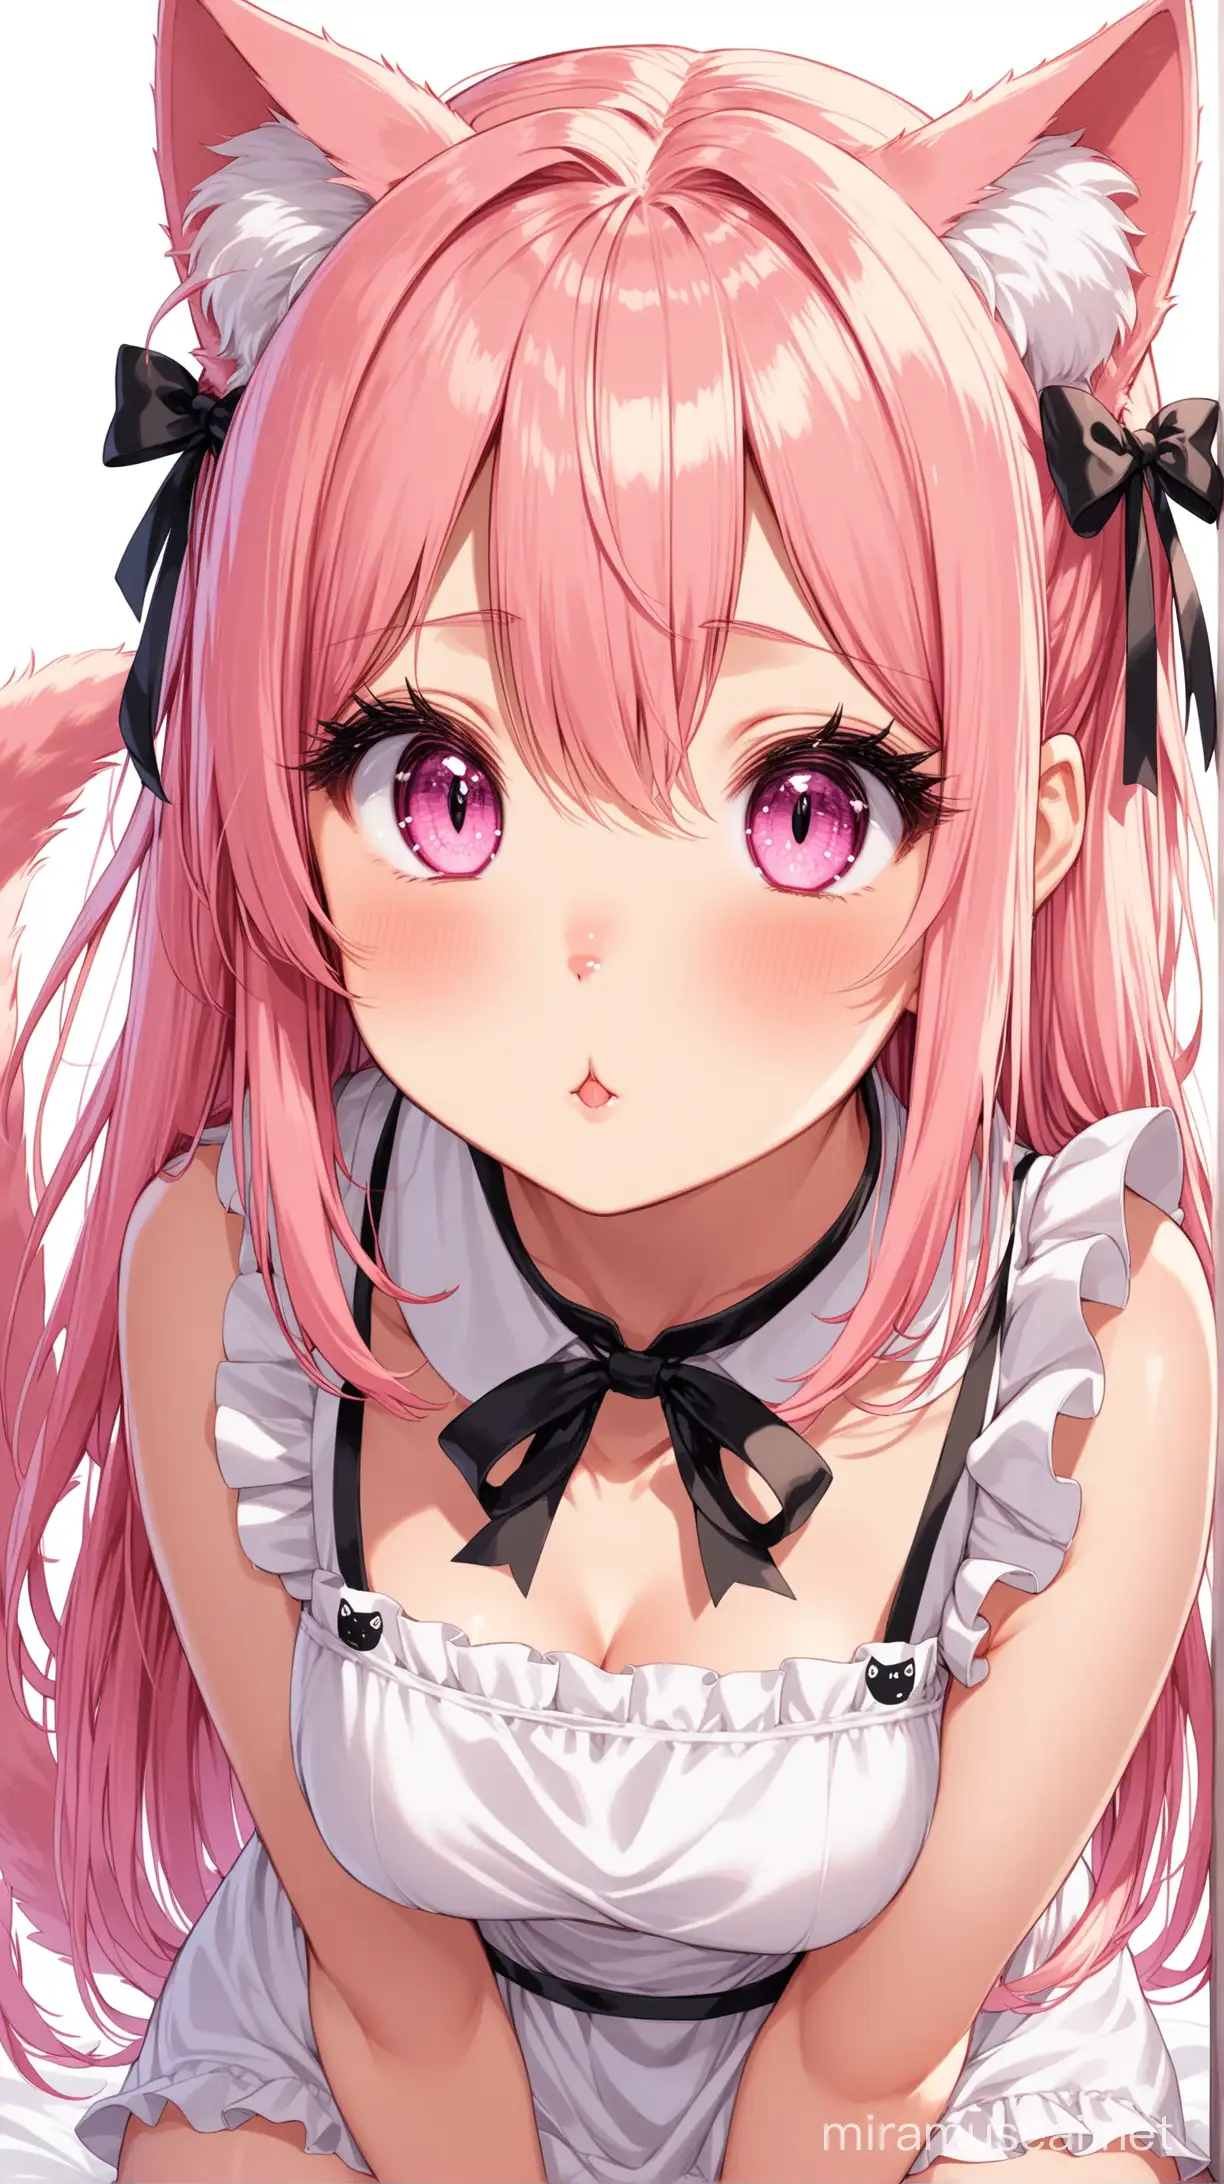 Adorable Anime Cat Girl in Pink Maid Uniform Receives Headpat